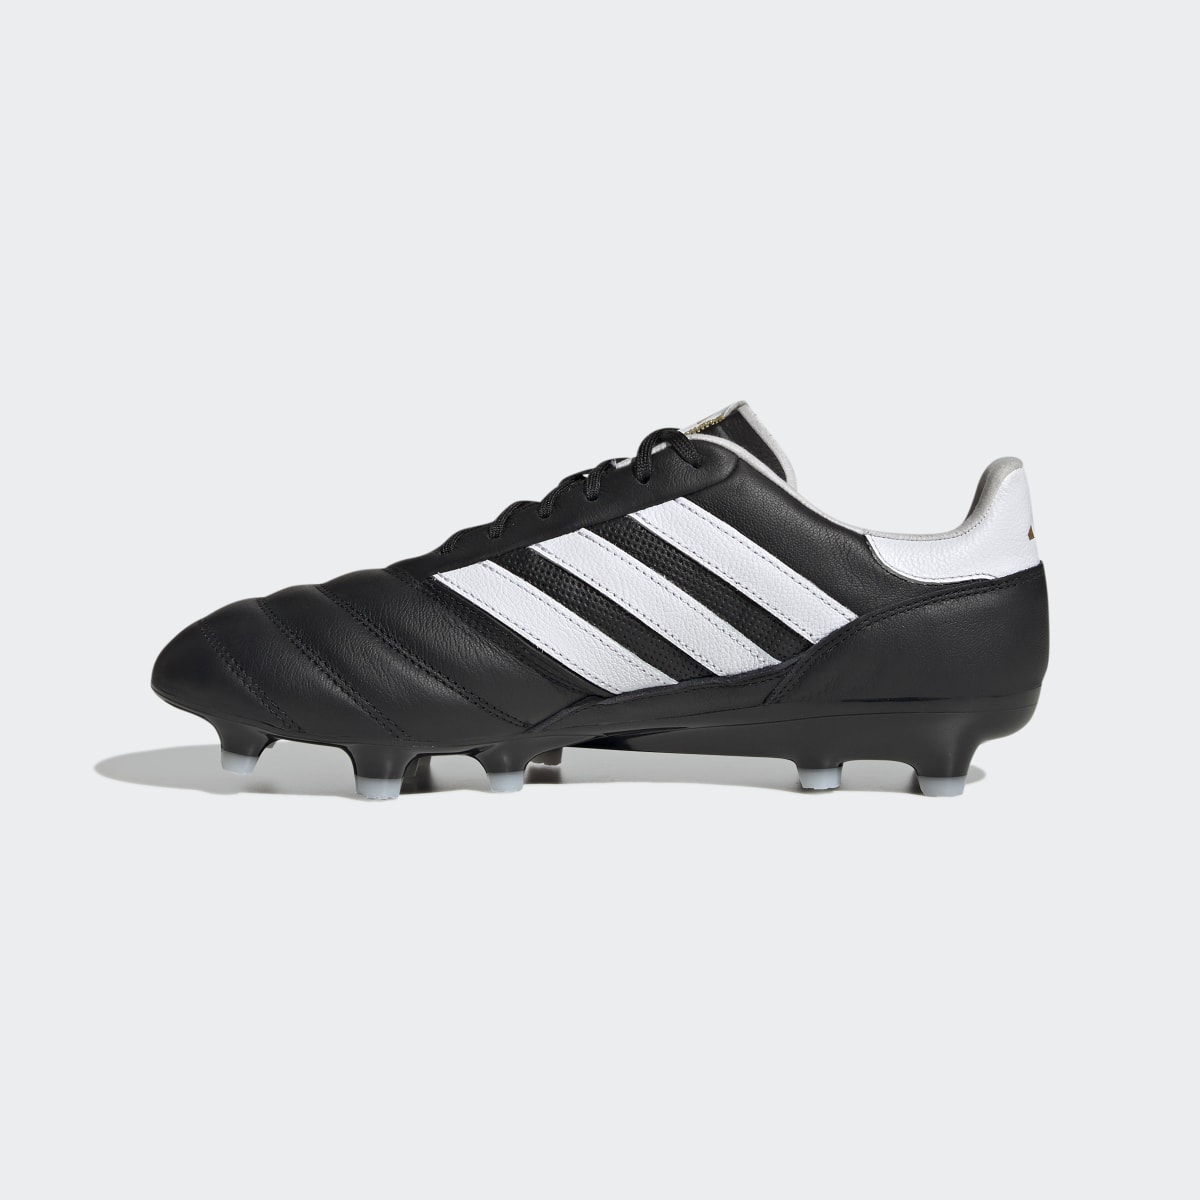 Adidas Copa Icon Firm Ground Soccer Cleats. 10